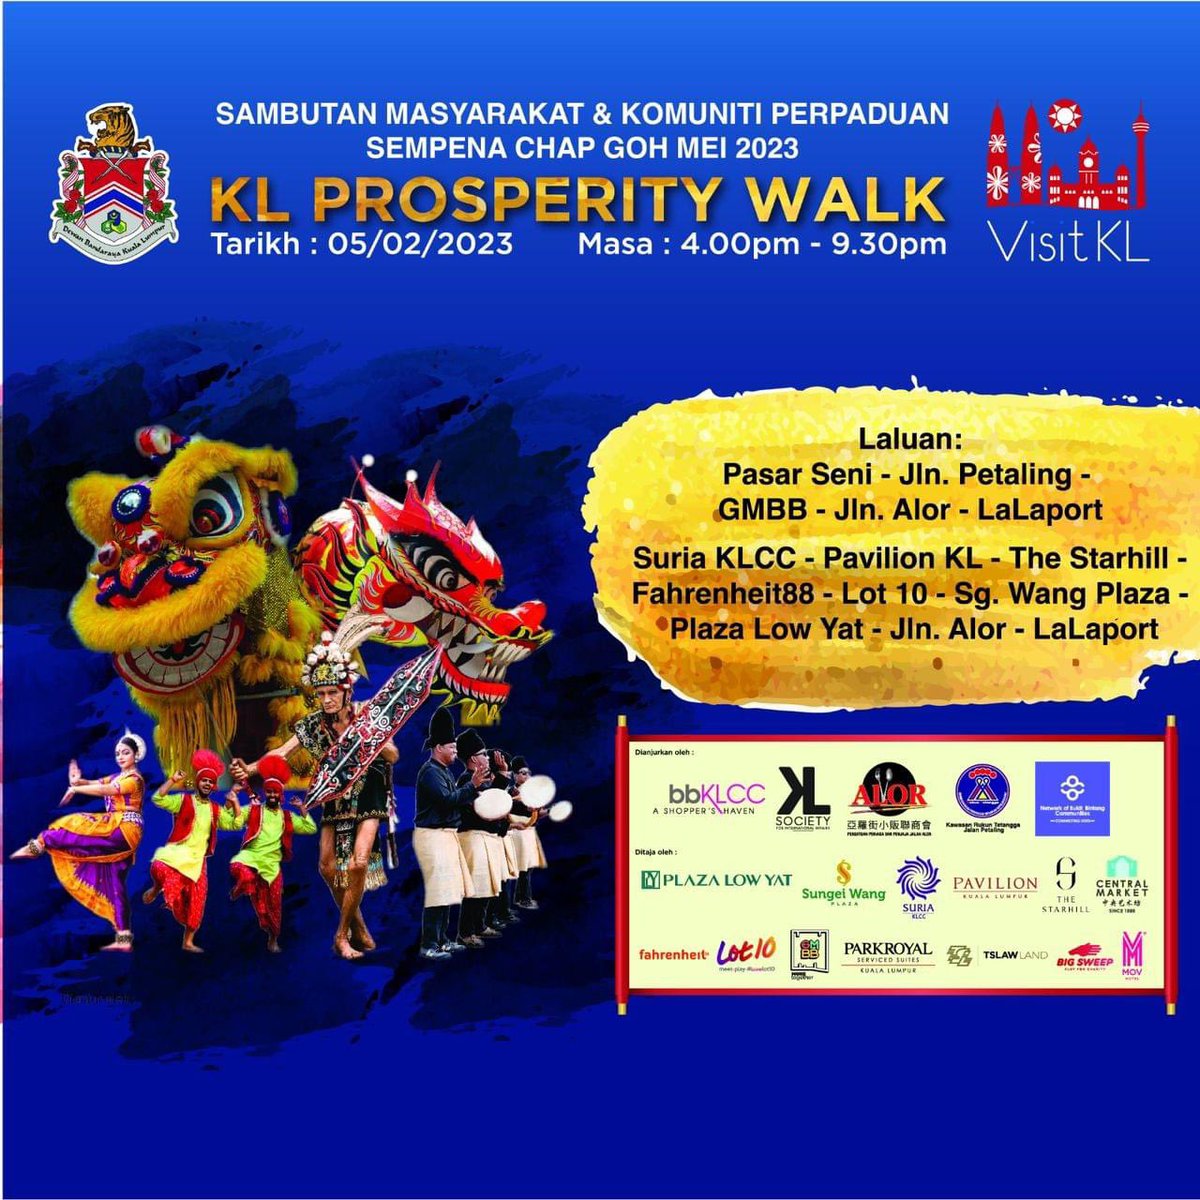 KL Prosperity Walk! 🤩 

In case you didn't know, there will be various live festive performances this weekend ⬇️
🗓️ 5 FEBRUARY 2023
⏰ 4PM - 9:30PM 

Flagged-off here at 📍 Pasar Seni  @CentralMarketKL and taking us through Downtown KL. Let’s enjoy these festivities together!